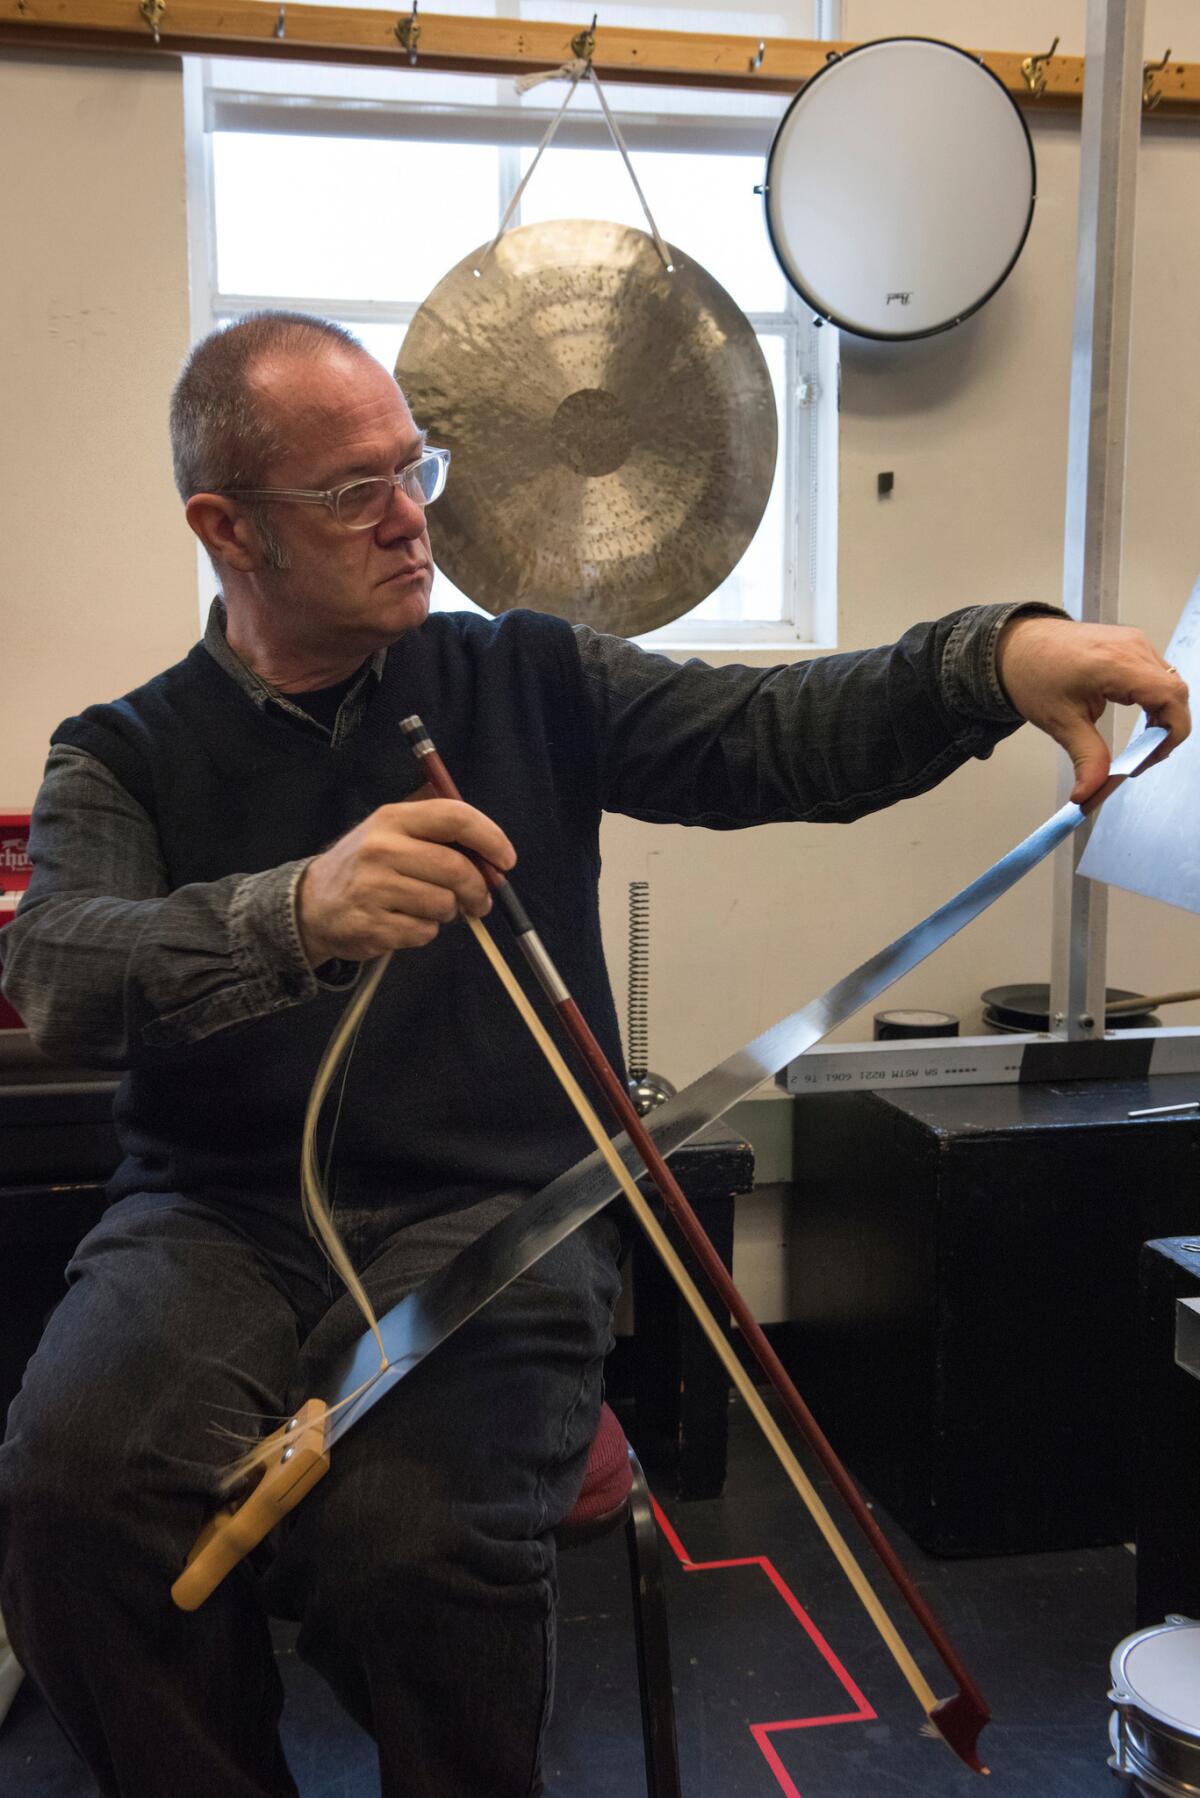 Composer David Coulter at rehearsal playing the saw. (Stefan Cohen)